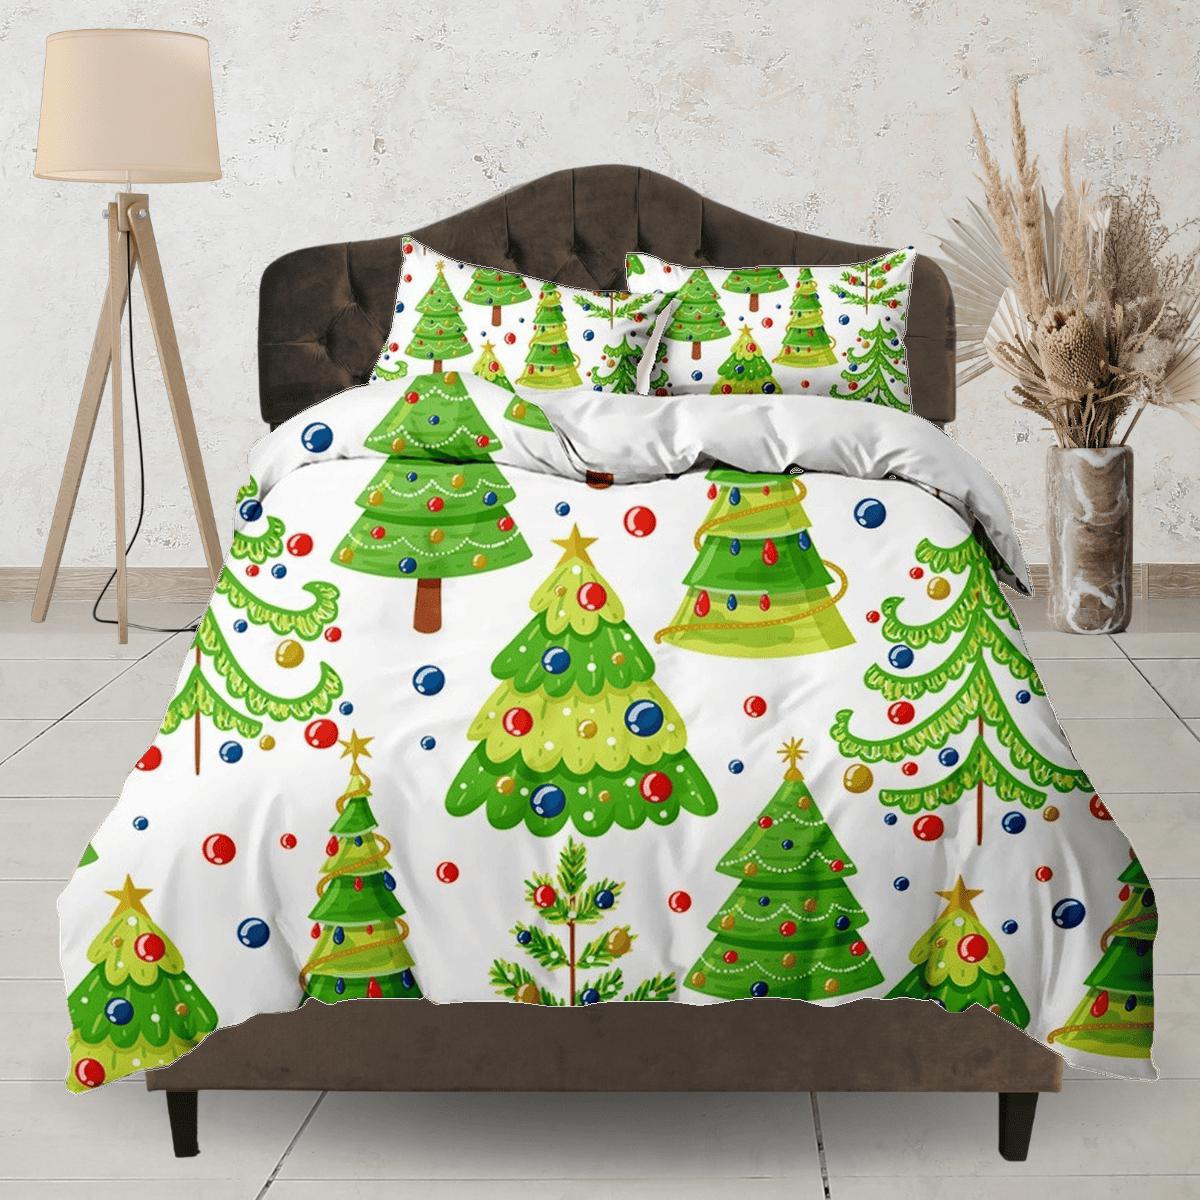 daintyduvet Christmas tree and bauble bedding & pillowcase holiday gift duvet cover king queen full twin toddler bedding baby Christmas farmhouse decor